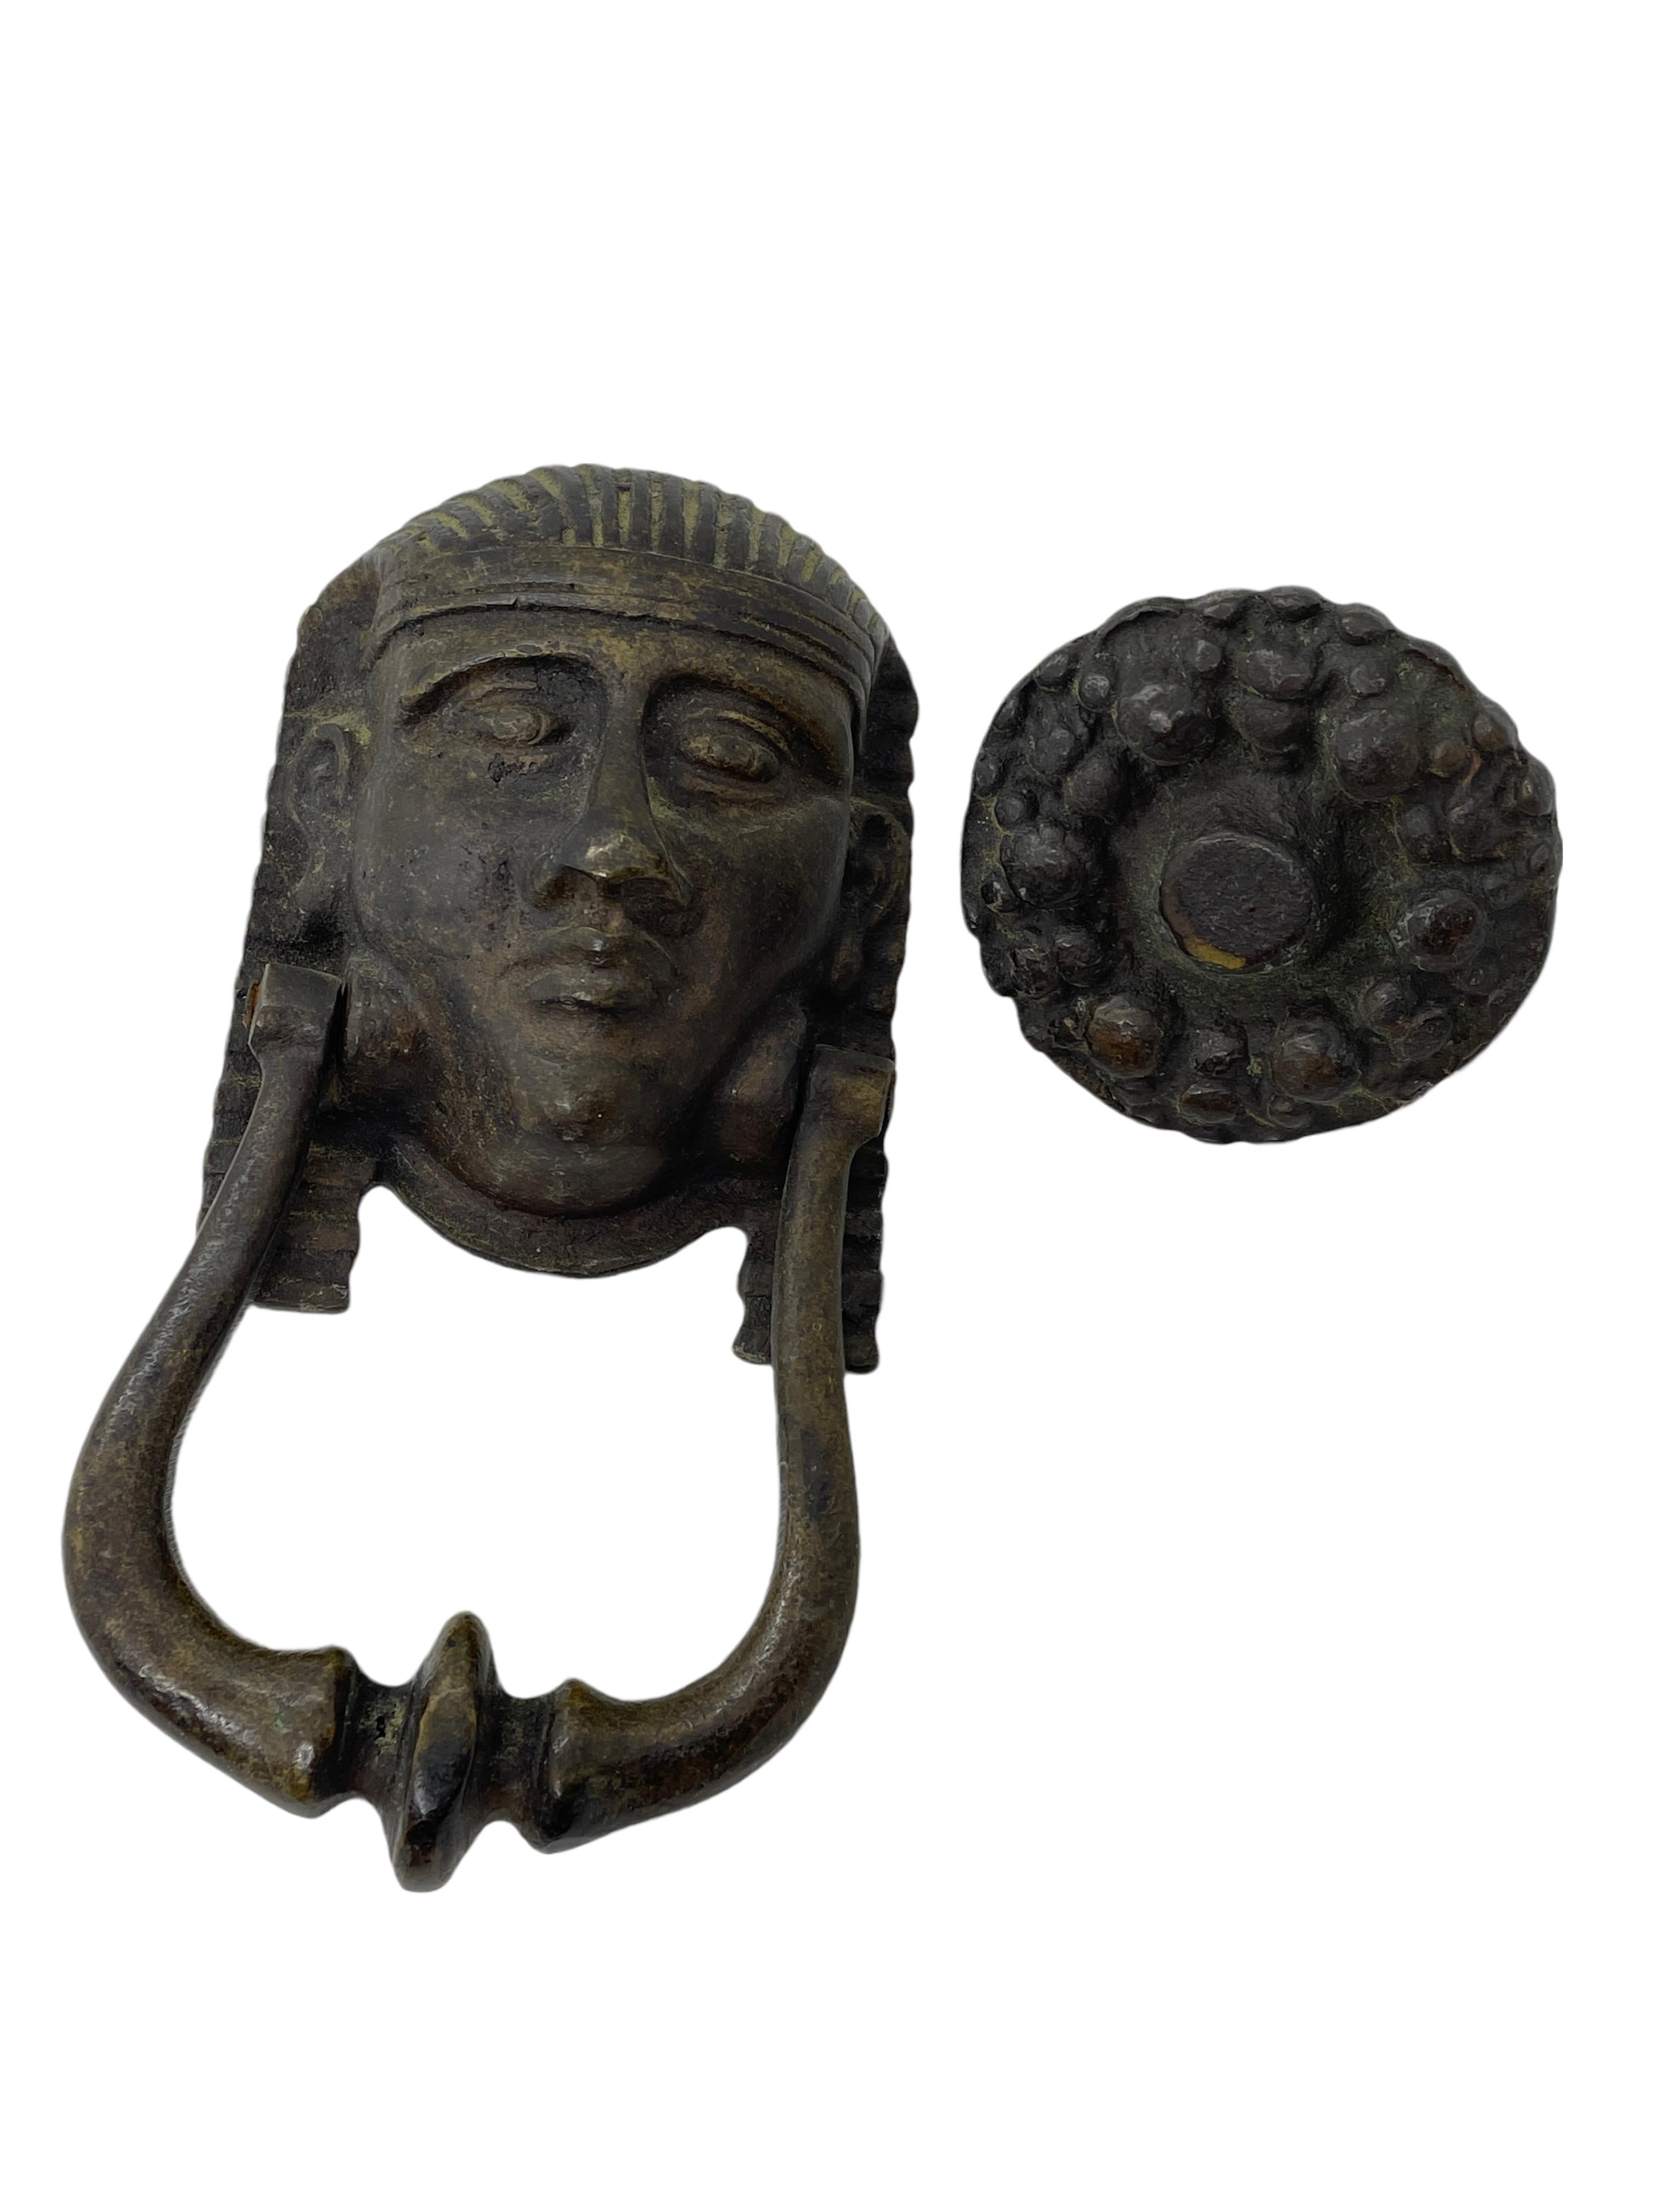 Classic 19th century German Pharaoh head door knocker, made of Bronze. Nice addition to your front door. Found at an estate sale in Germany. It is not marked.